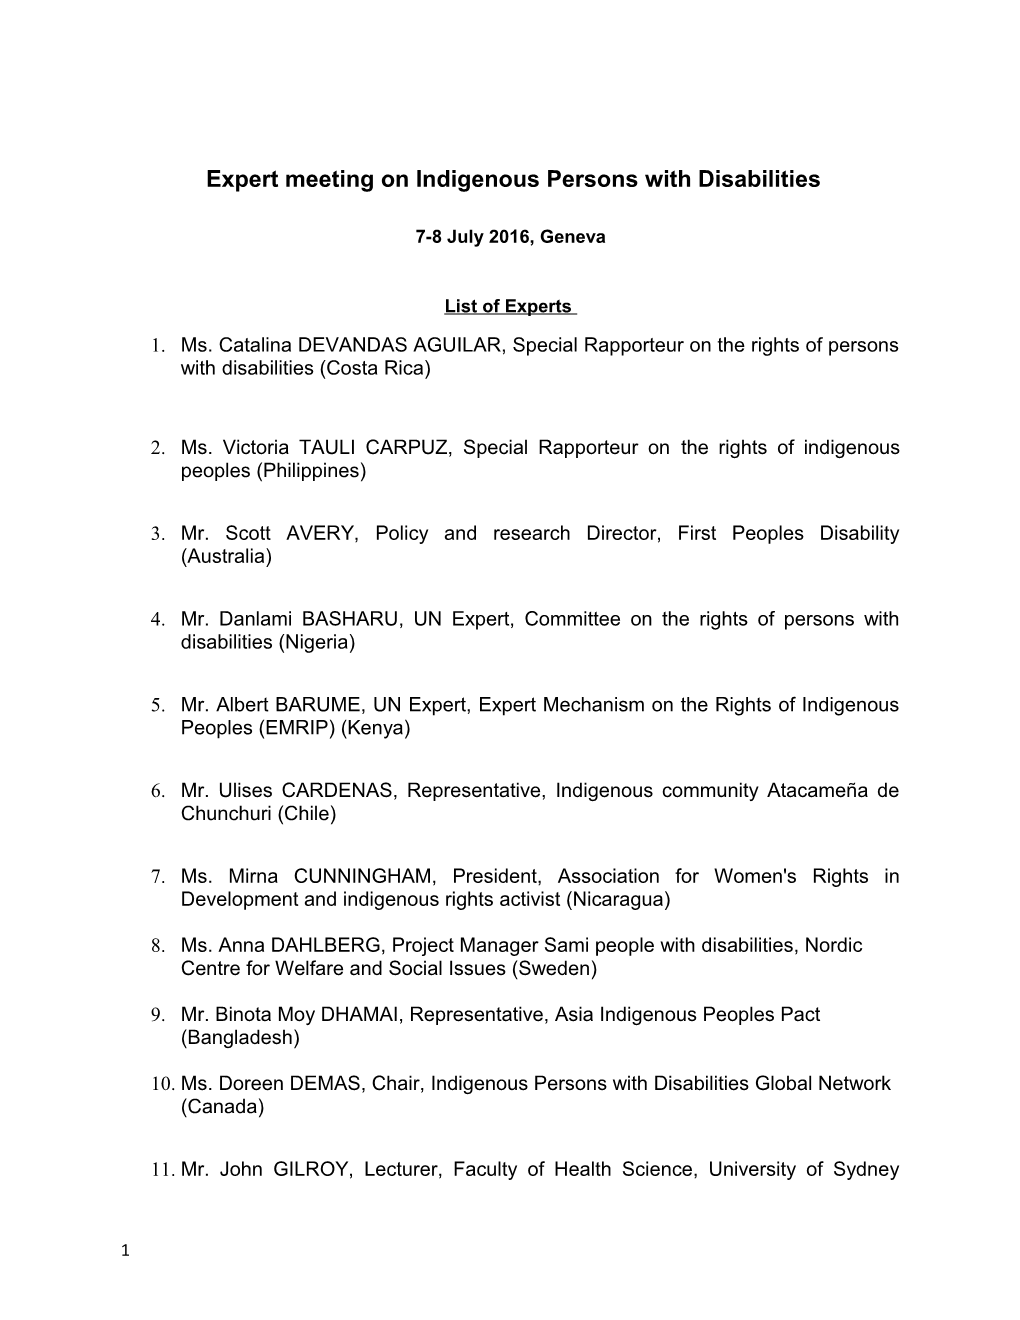 Expert Meeting on Indigenous Persons with Disabilities